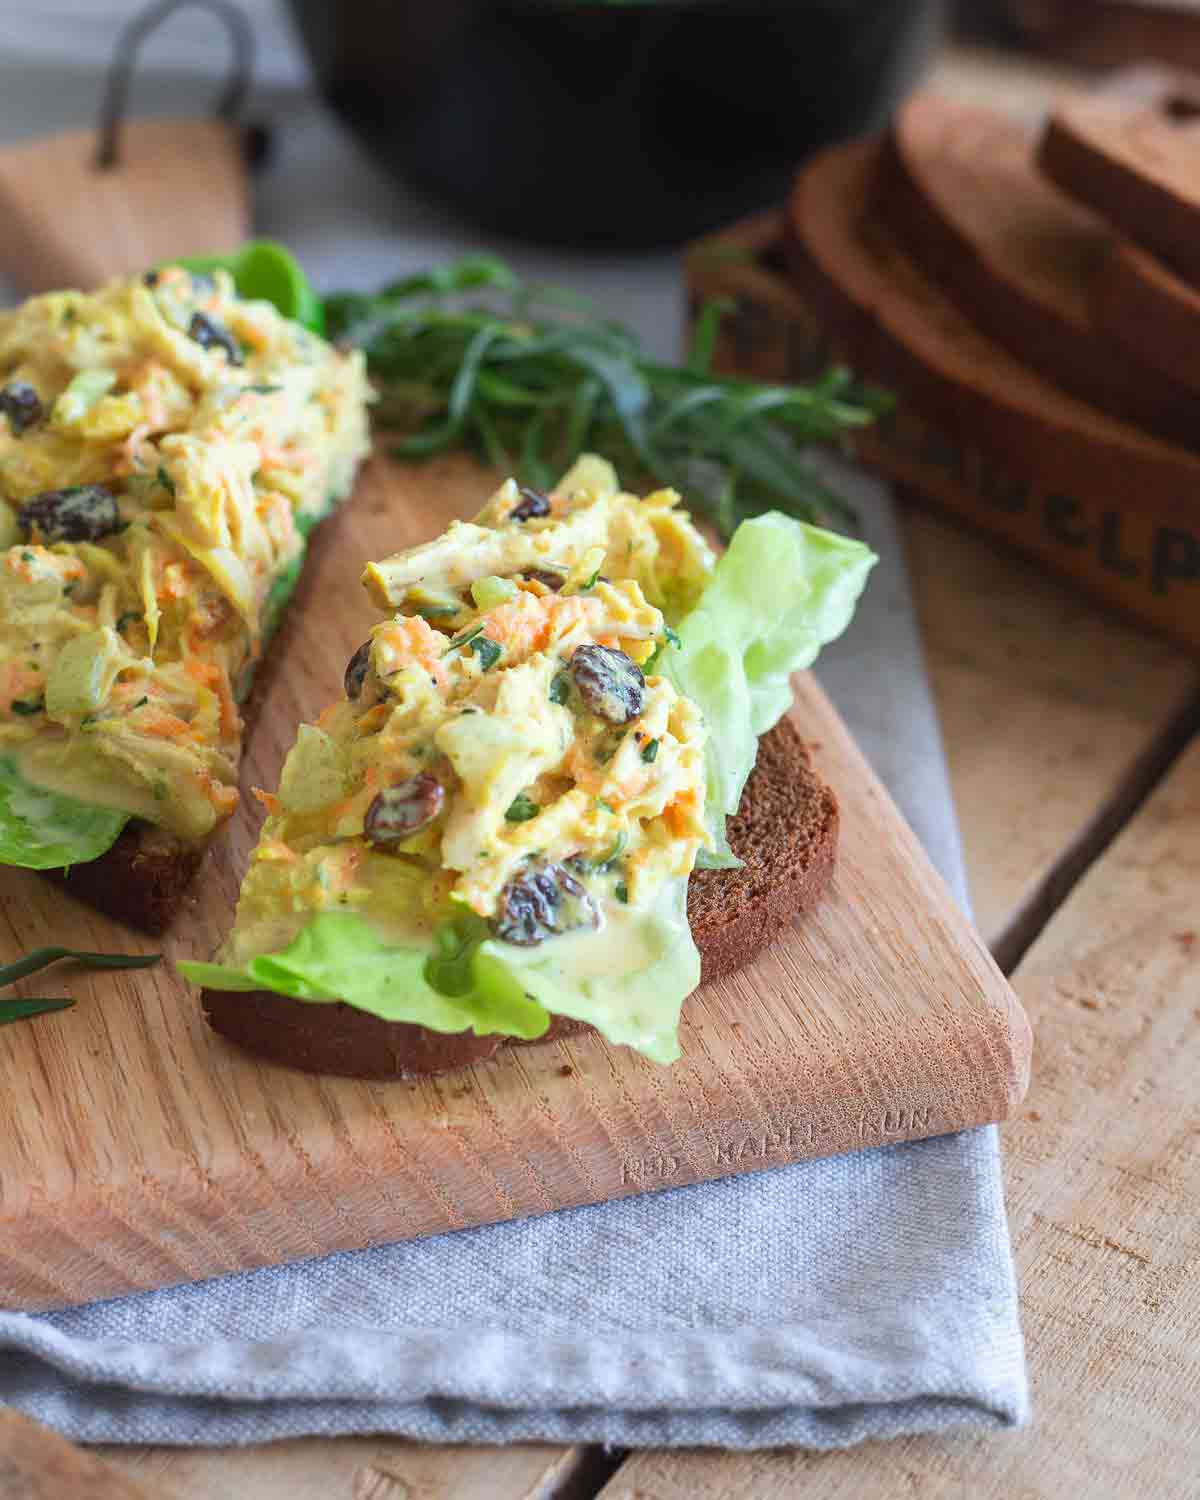 Sweet raisins and cinnamon complement savory turmeric and tarragon in this chicken salad.